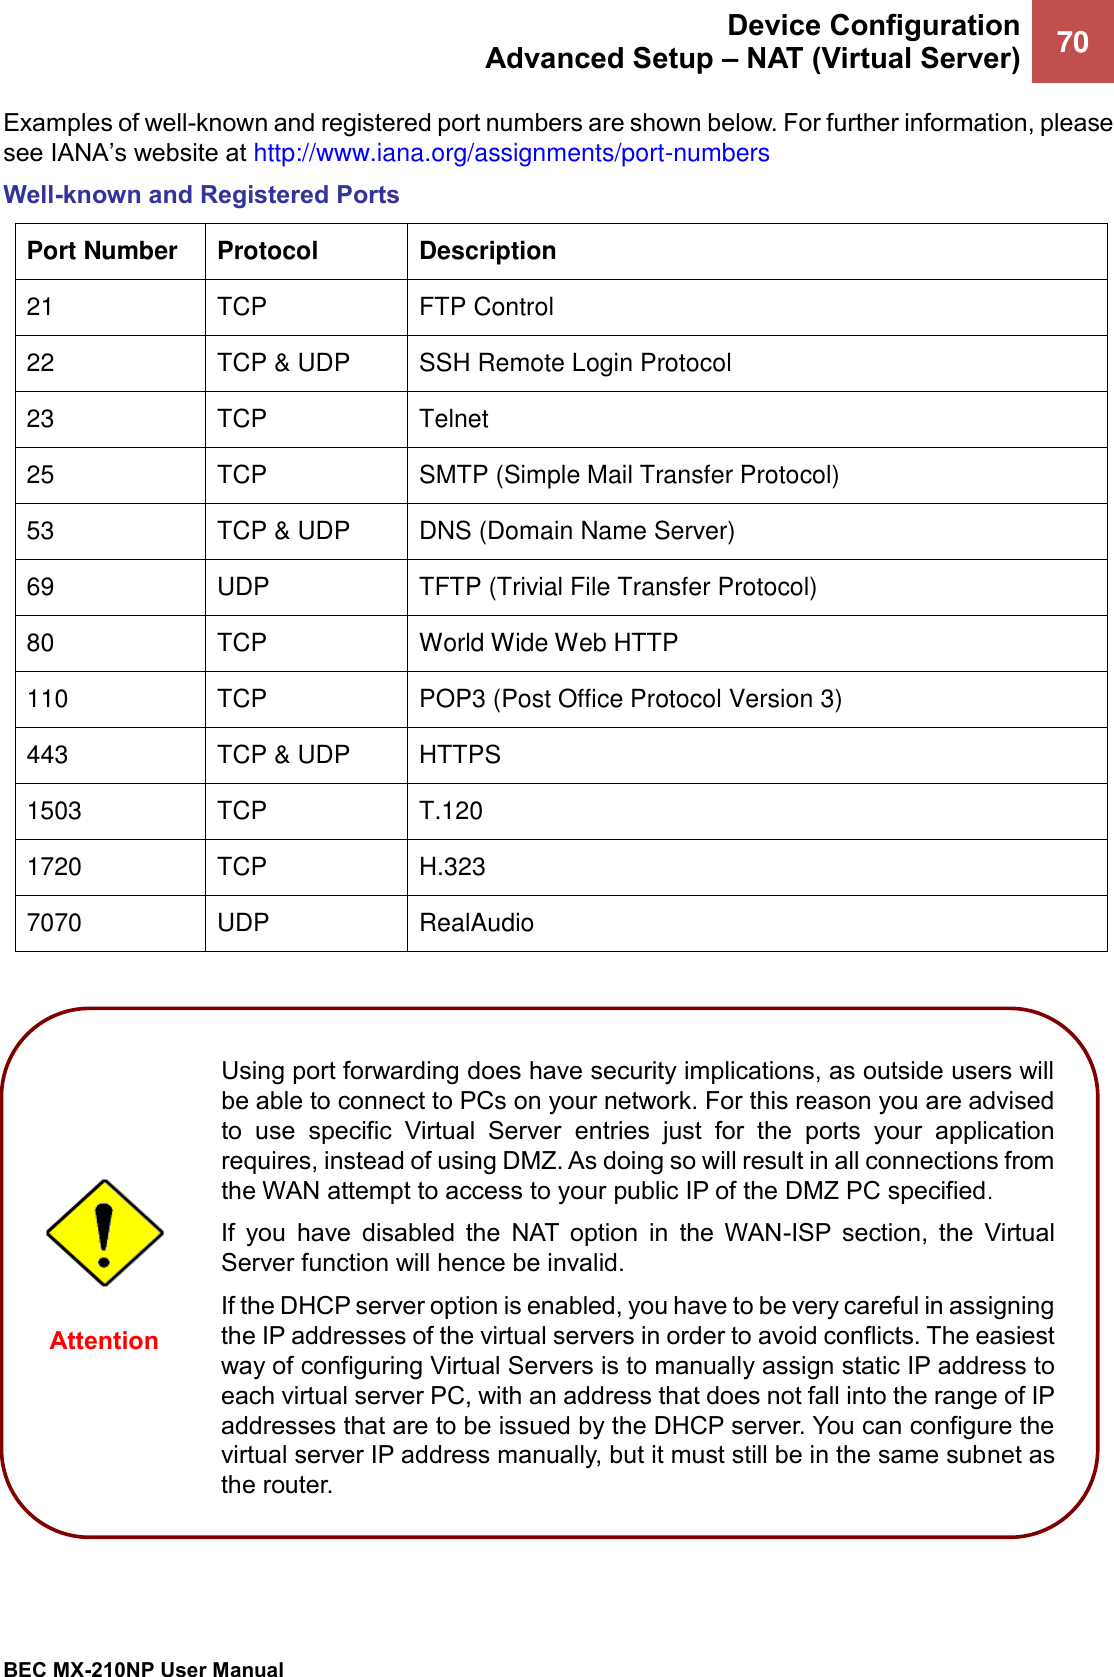  Device Configuration Advanced Setup – NAT (Virtual Server) 70   BEC MX-210NP User Manual  Examples of well-known and registered port numbers are shown below. For further information, please see IANA’s website at http://www.iana.org/assignments/port-numbers Well-known and Registered Ports Port Number Protocol Description 21 TCP FTP Control 22 TCP &amp; UDP SSH Remote Login Protocol 23 TCP Telnet 25 TCP SMTP (Simple Mail Transfer Protocol) 53 TCP &amp; UDP DNS (Domain Name Server) 69 UDP TFTP (Trivial File Transfer Protocol) 80 TCP World Wide Web HTTP 110 TCP POP3 (Post Office Protocol Version 3) 443 TCP &amp; UDP HTTPS 1503 TCP T.120 1720 TCP H.323 7070 UDP RealAudio   Using port forwarding does have security implications, as outside users will be able to connect to PCs on your network. For this reason you are advised to  use  specific  Virtual  Server  entries  just  for  the  ports  your  application requires, instead of using DMZ. As doing so will result in all connections from the WAN attempt to access to your public IP of the DMZ PC specified. If  you  have  disabled  the  NAT  option  in  the  WAN-ISP  section,  the  Virtual Server function will hence be invalid. If the DHCP server option is enabled, you have to be very careful in assigning the IP addresses of the virtual servers in order to avoid conflicts. The easiest way of configuring Virtual Servers is to manually assign static IP address to each virtual server PC, with an address that does not fall into the range of IP addresses that are to be issued by the DHCP server. You can configure the virtual server IP address manually, but it must still be in the same subnet as the router. Attention 